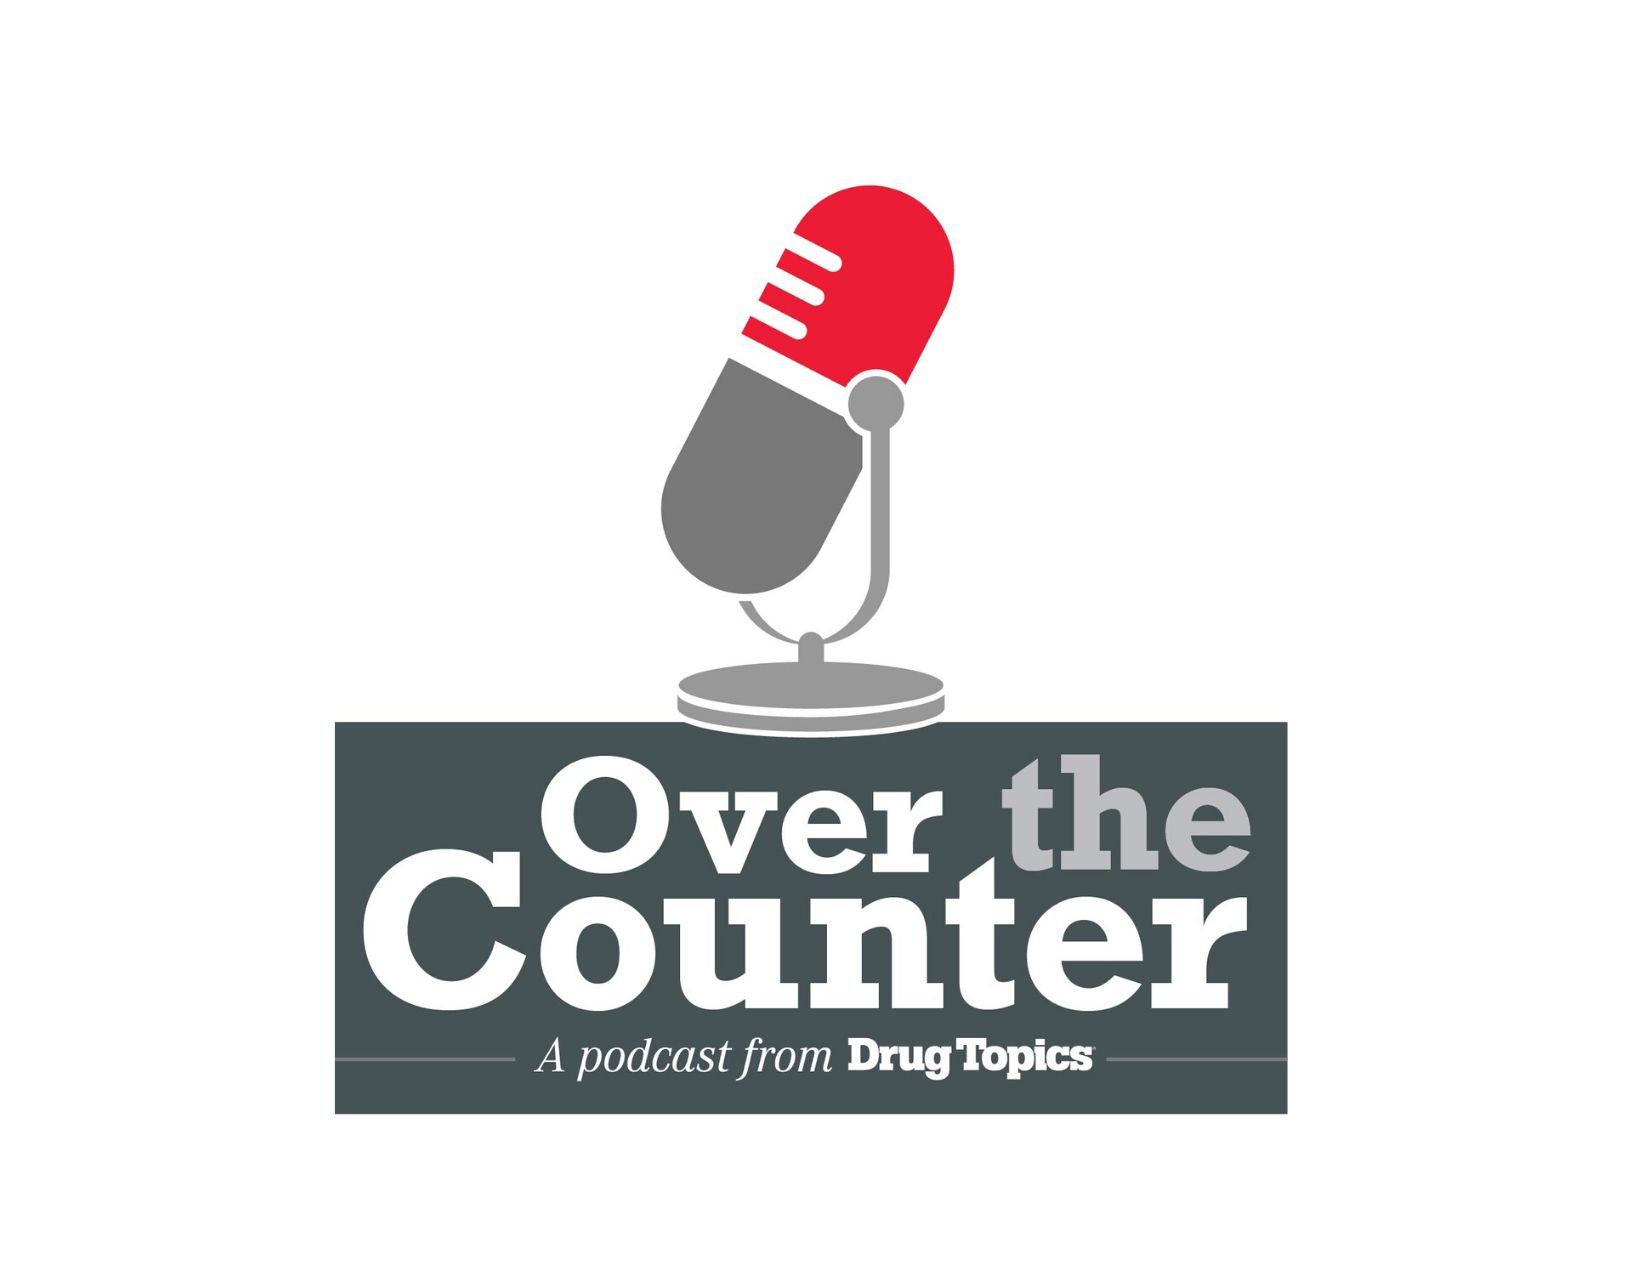 Over the Counter, a podcast from Drug Topics